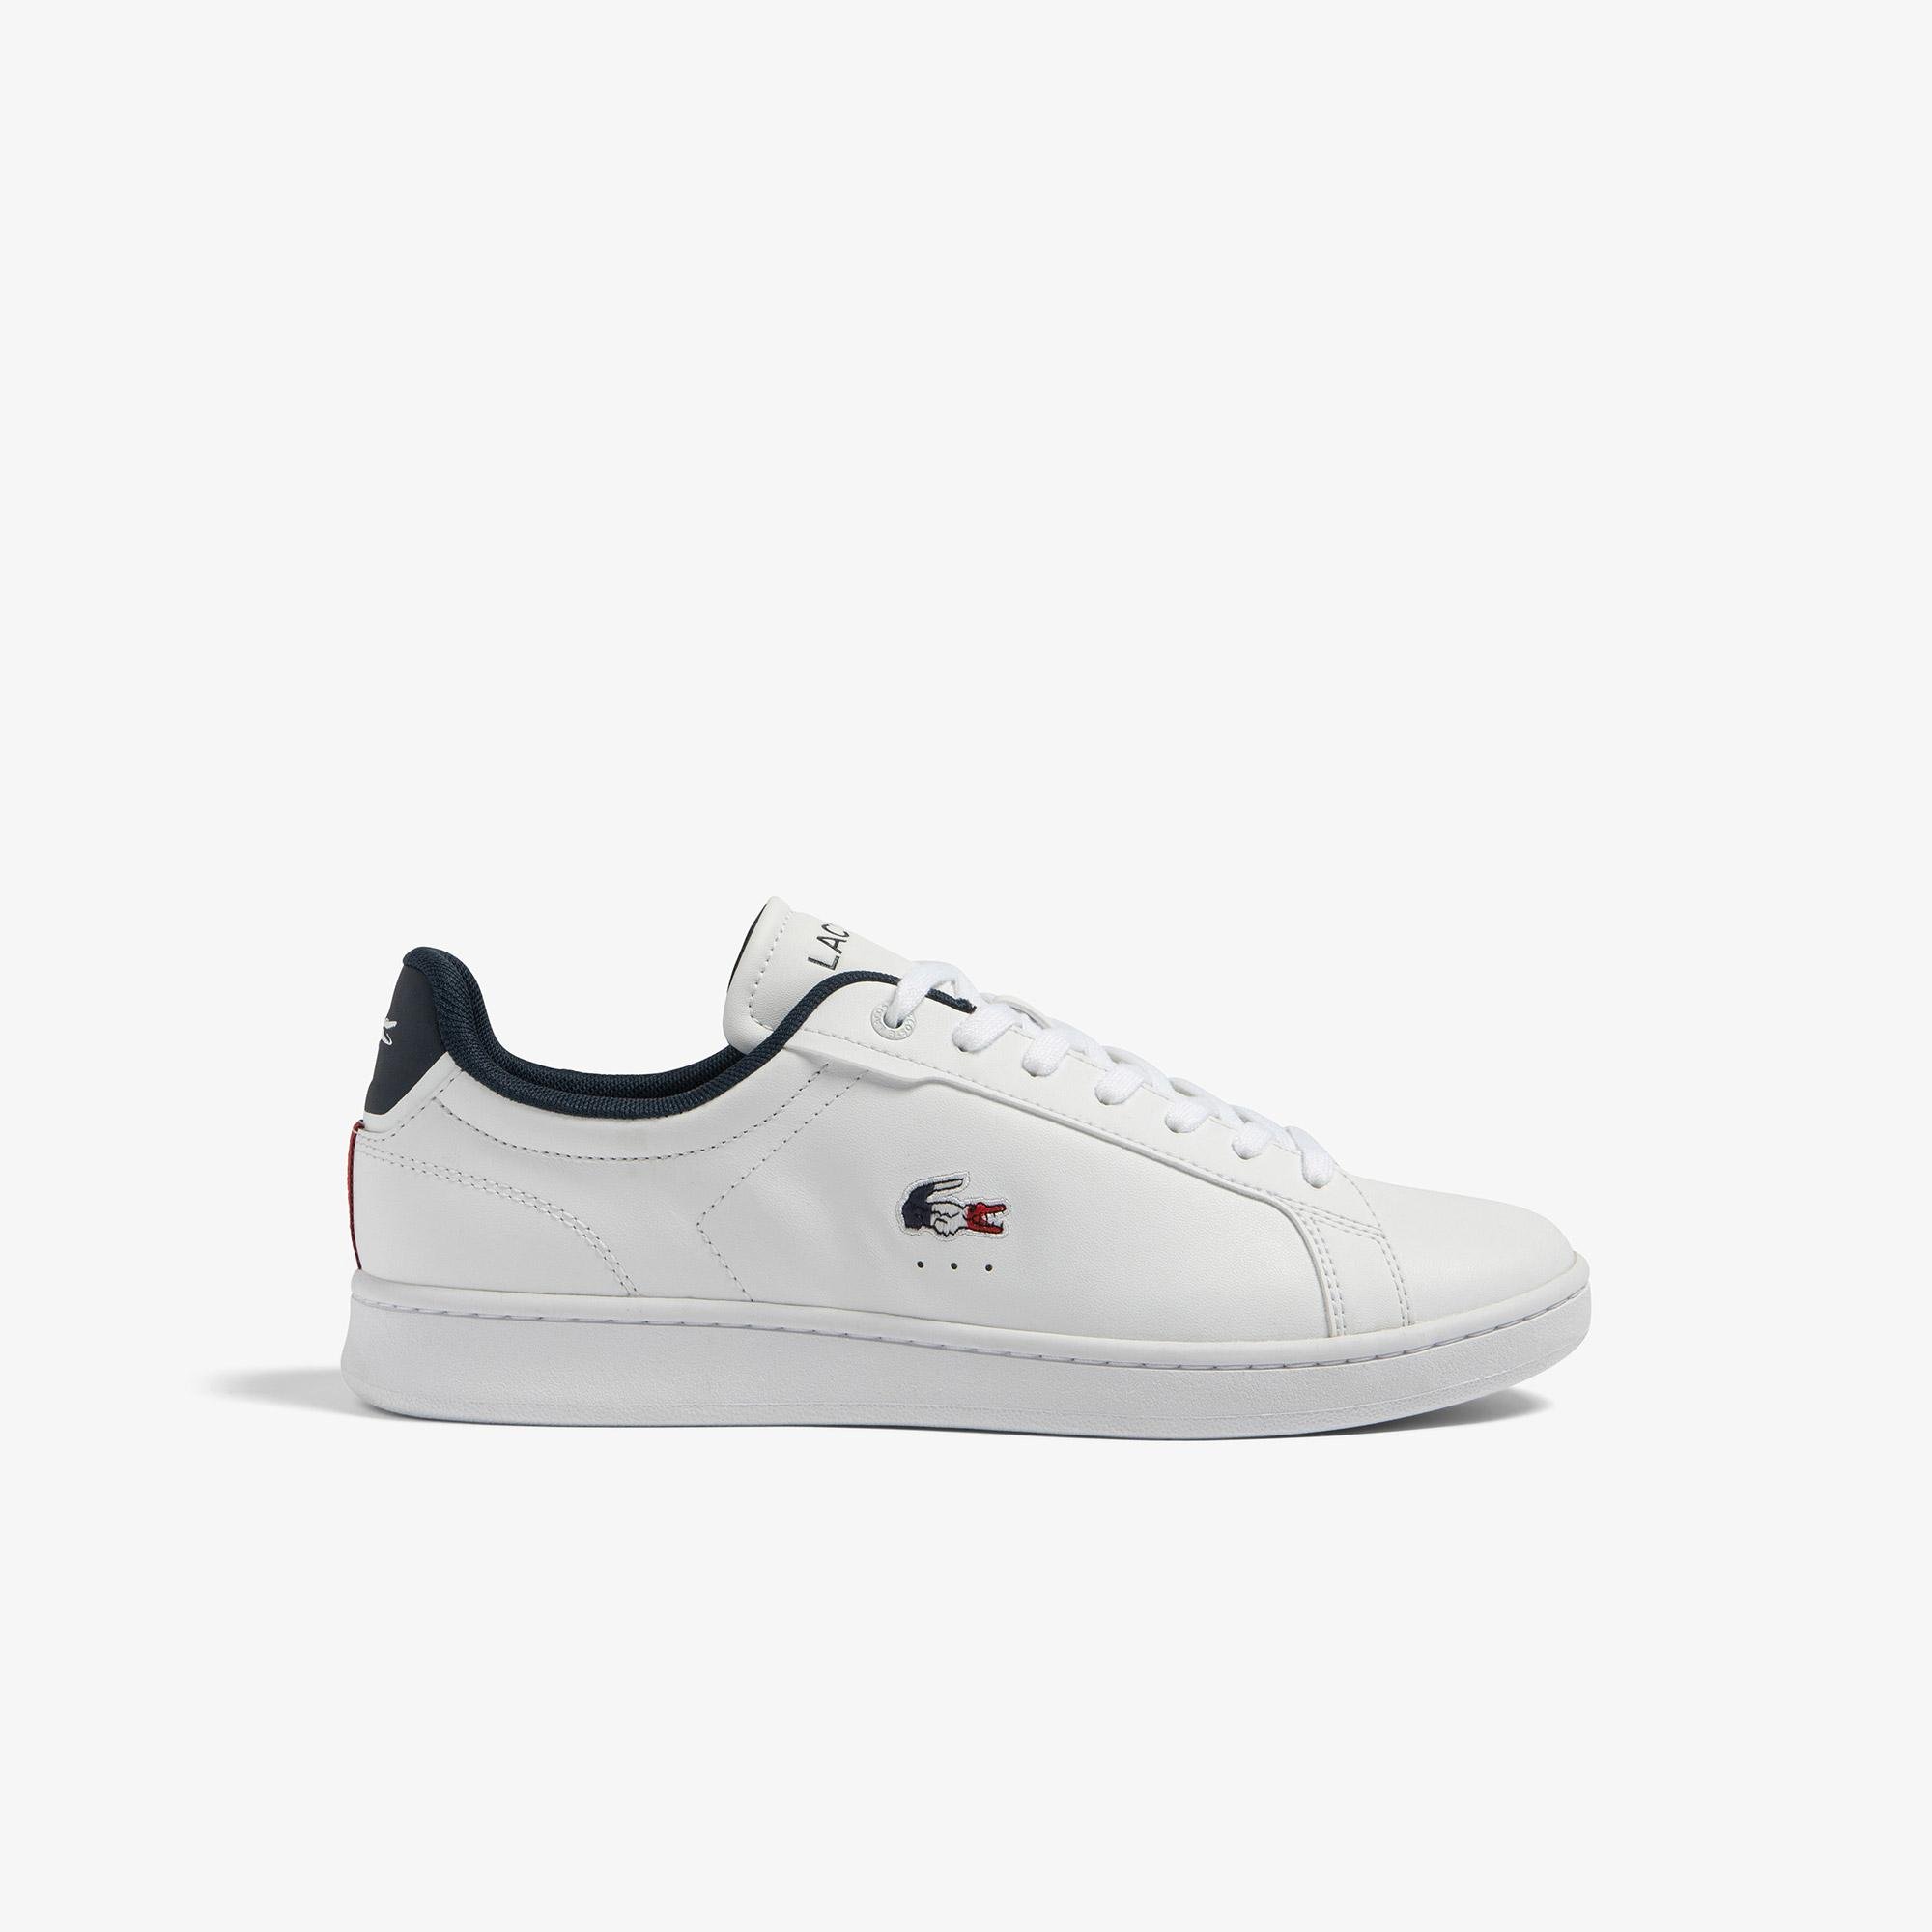 Lacoste Men's Carnaby Pro Leather Tricolour Trainers